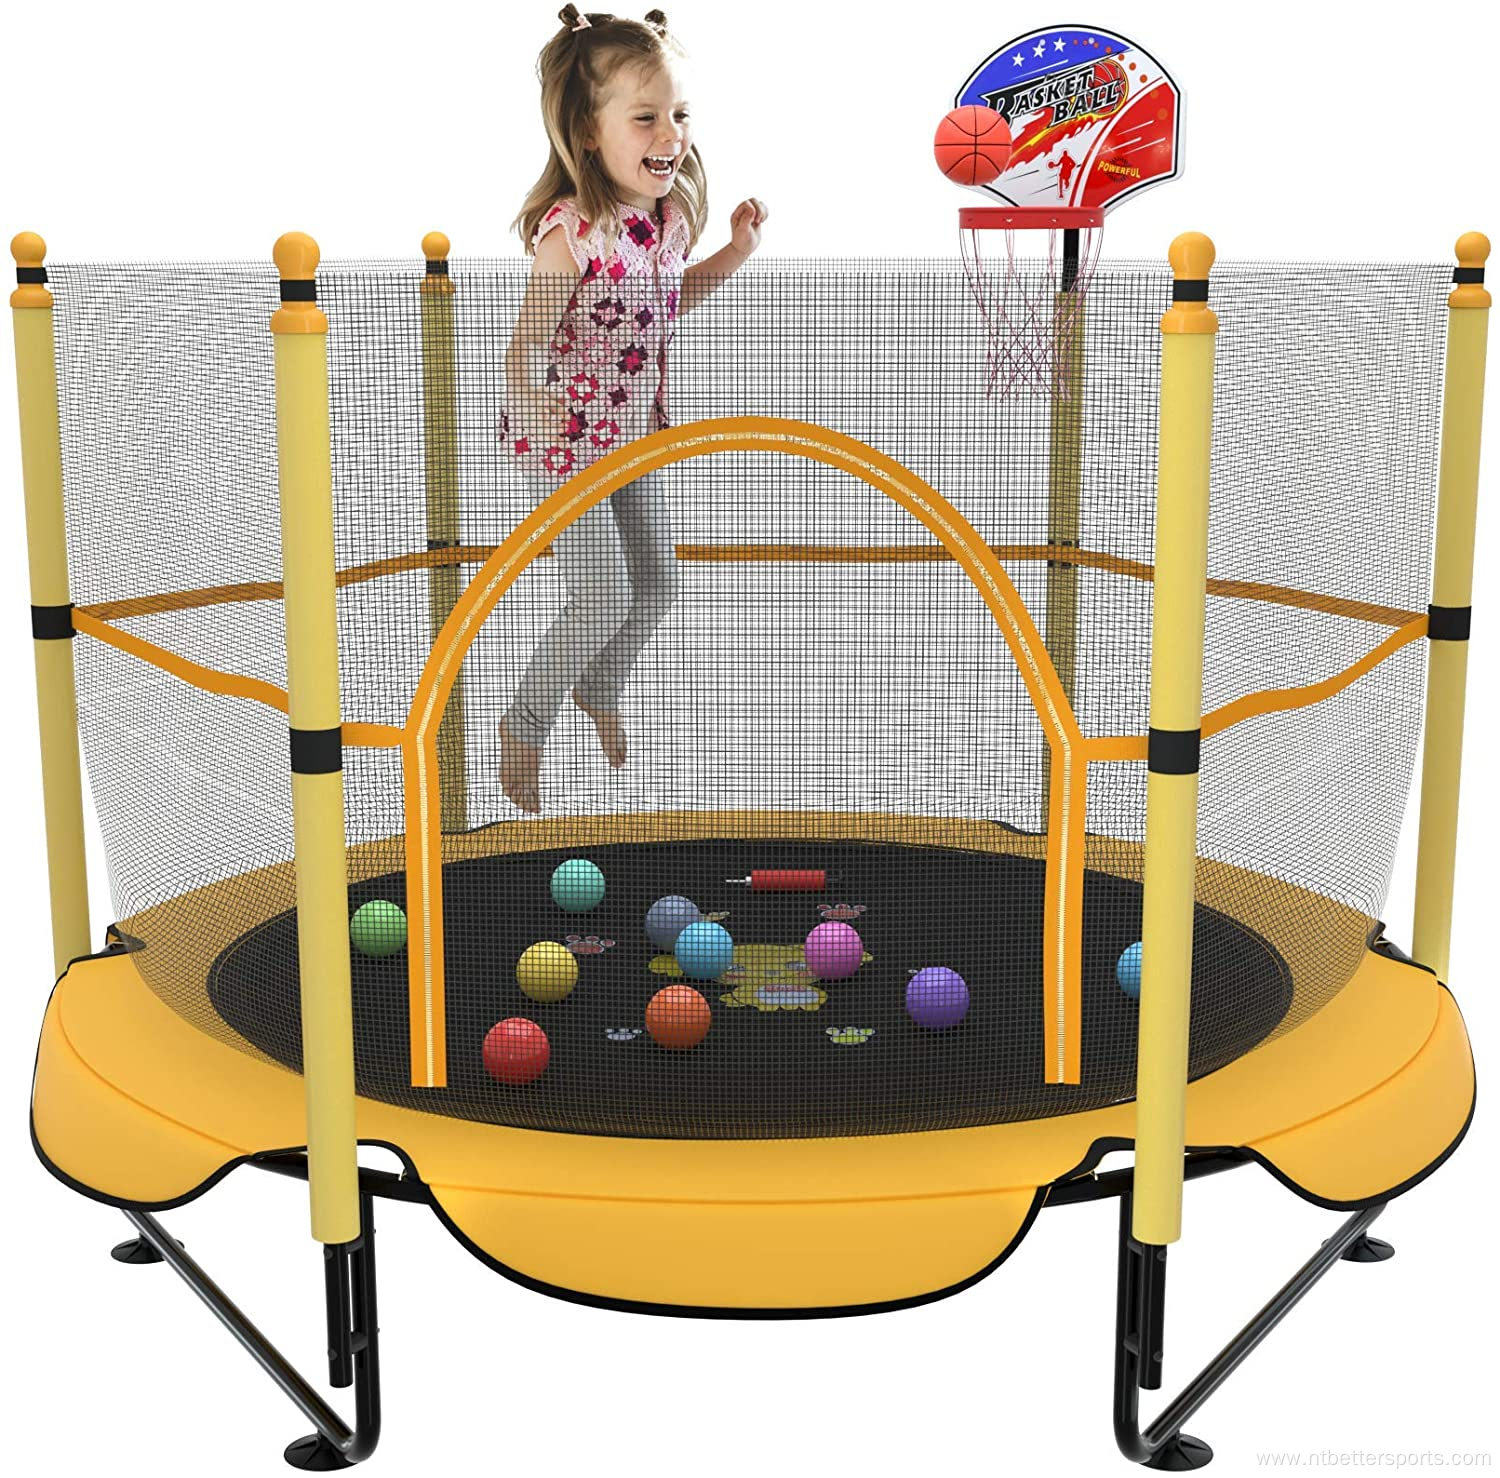 Safe children 60inch mini trampoline with protective net